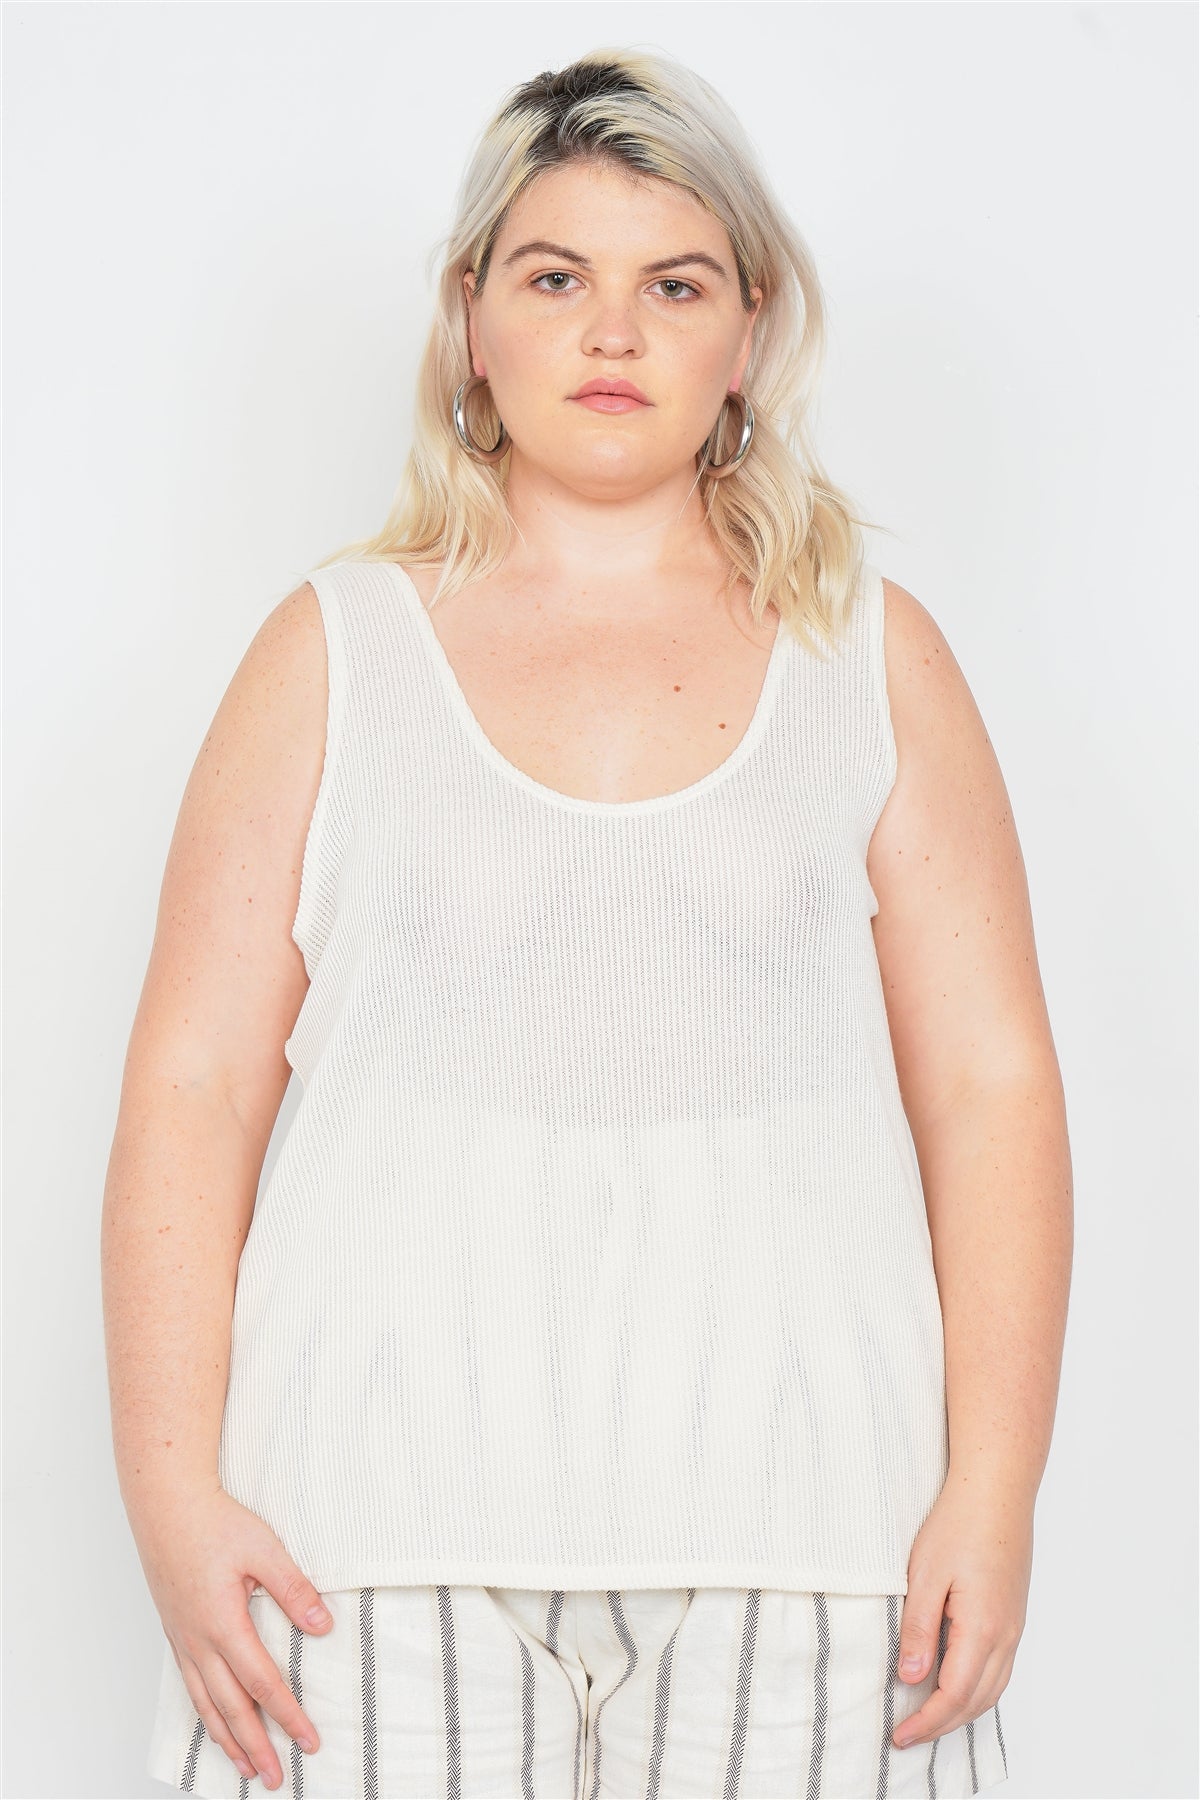 Plus Size Sheer Ivory Ribbed Causal